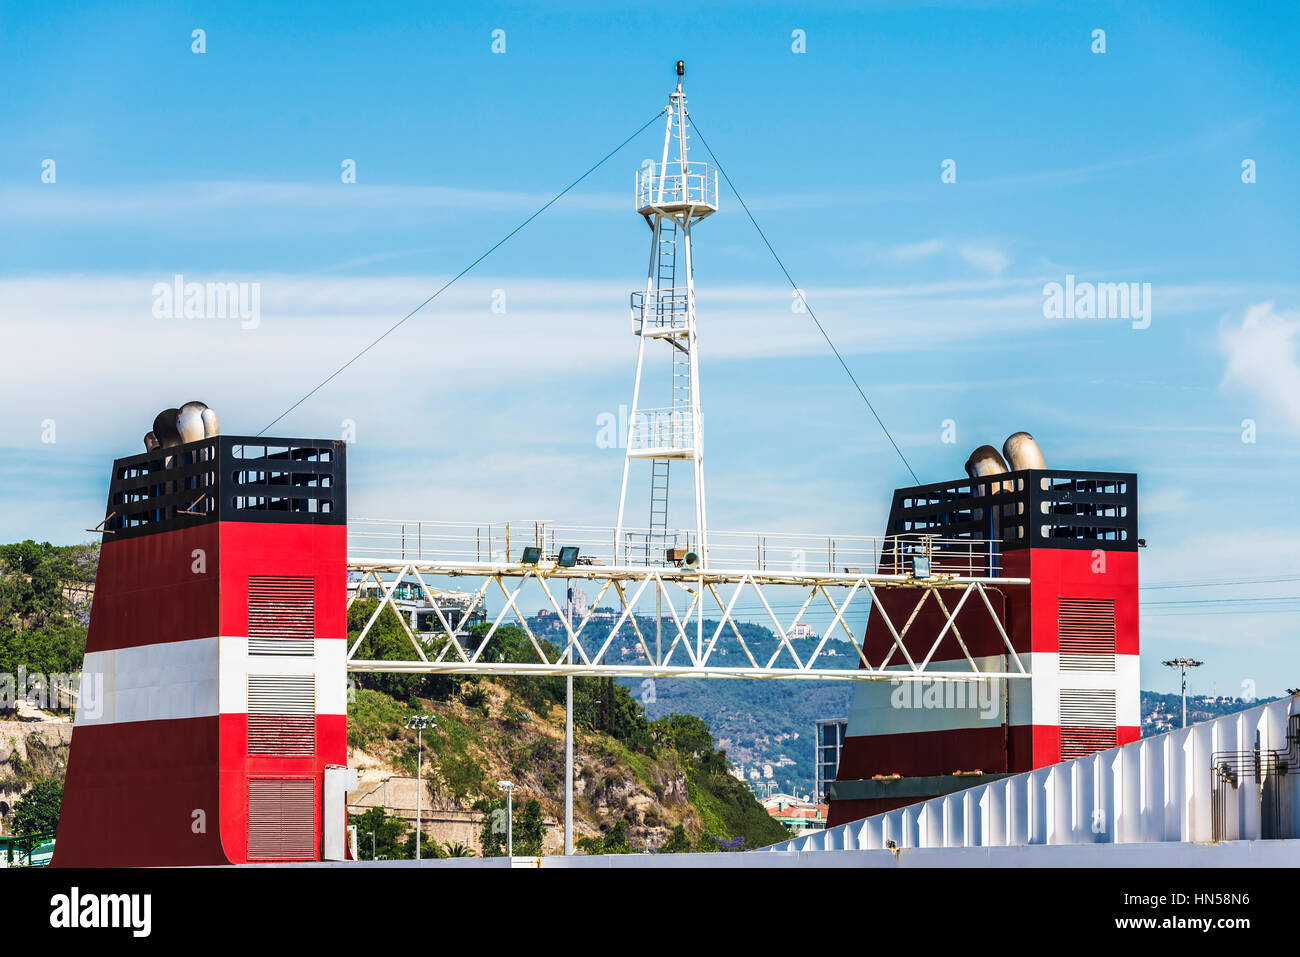 Red smokestack of a cargo ship with its look-out in the port of Barcelona, Catalonia, Spain Stock Photo